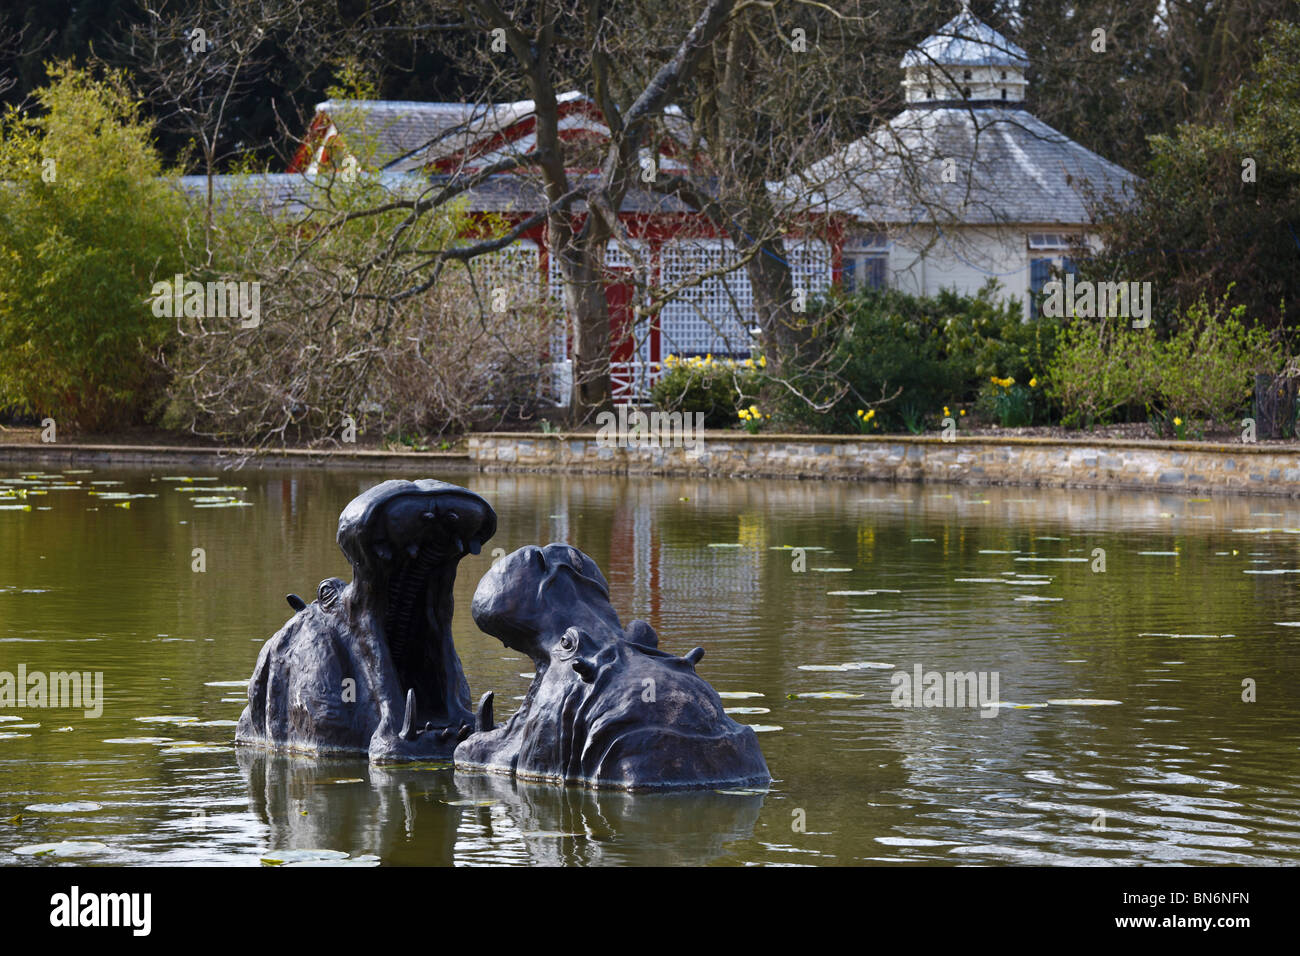 Sculpture of 'Bull Hippos Fighting' by Rupert Merton in the garden at Woburn Abbey, Bedfordshire, England Stock Photo